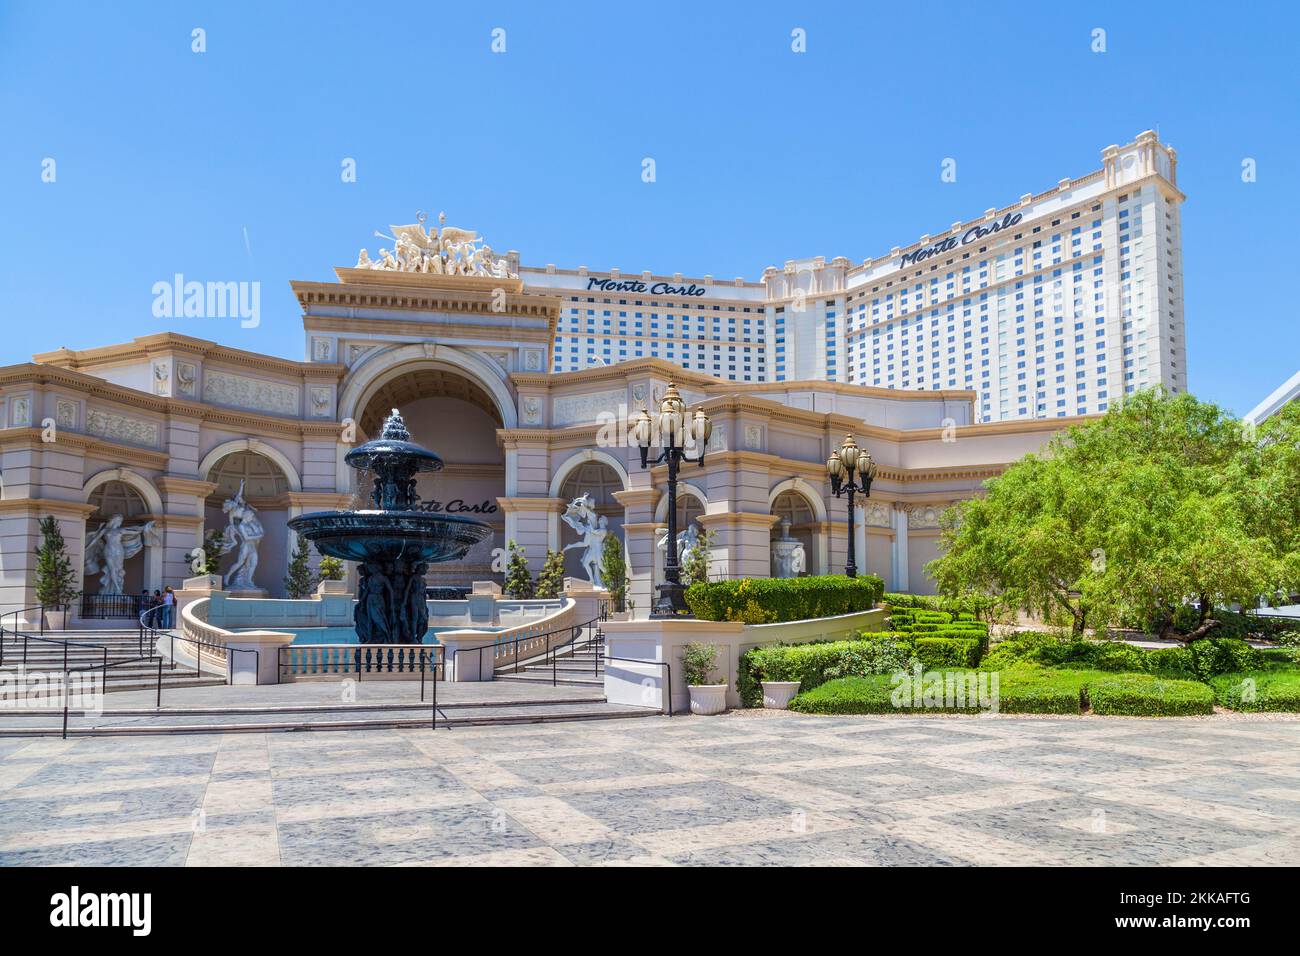 Las Vegas, USA - June 15, 2012: Monte Carlo Hotel and resort in Las Vegas, Nevada. The Monte Carlo reopened in FEB 08 three weeks after a rooftop fire Stock Photo